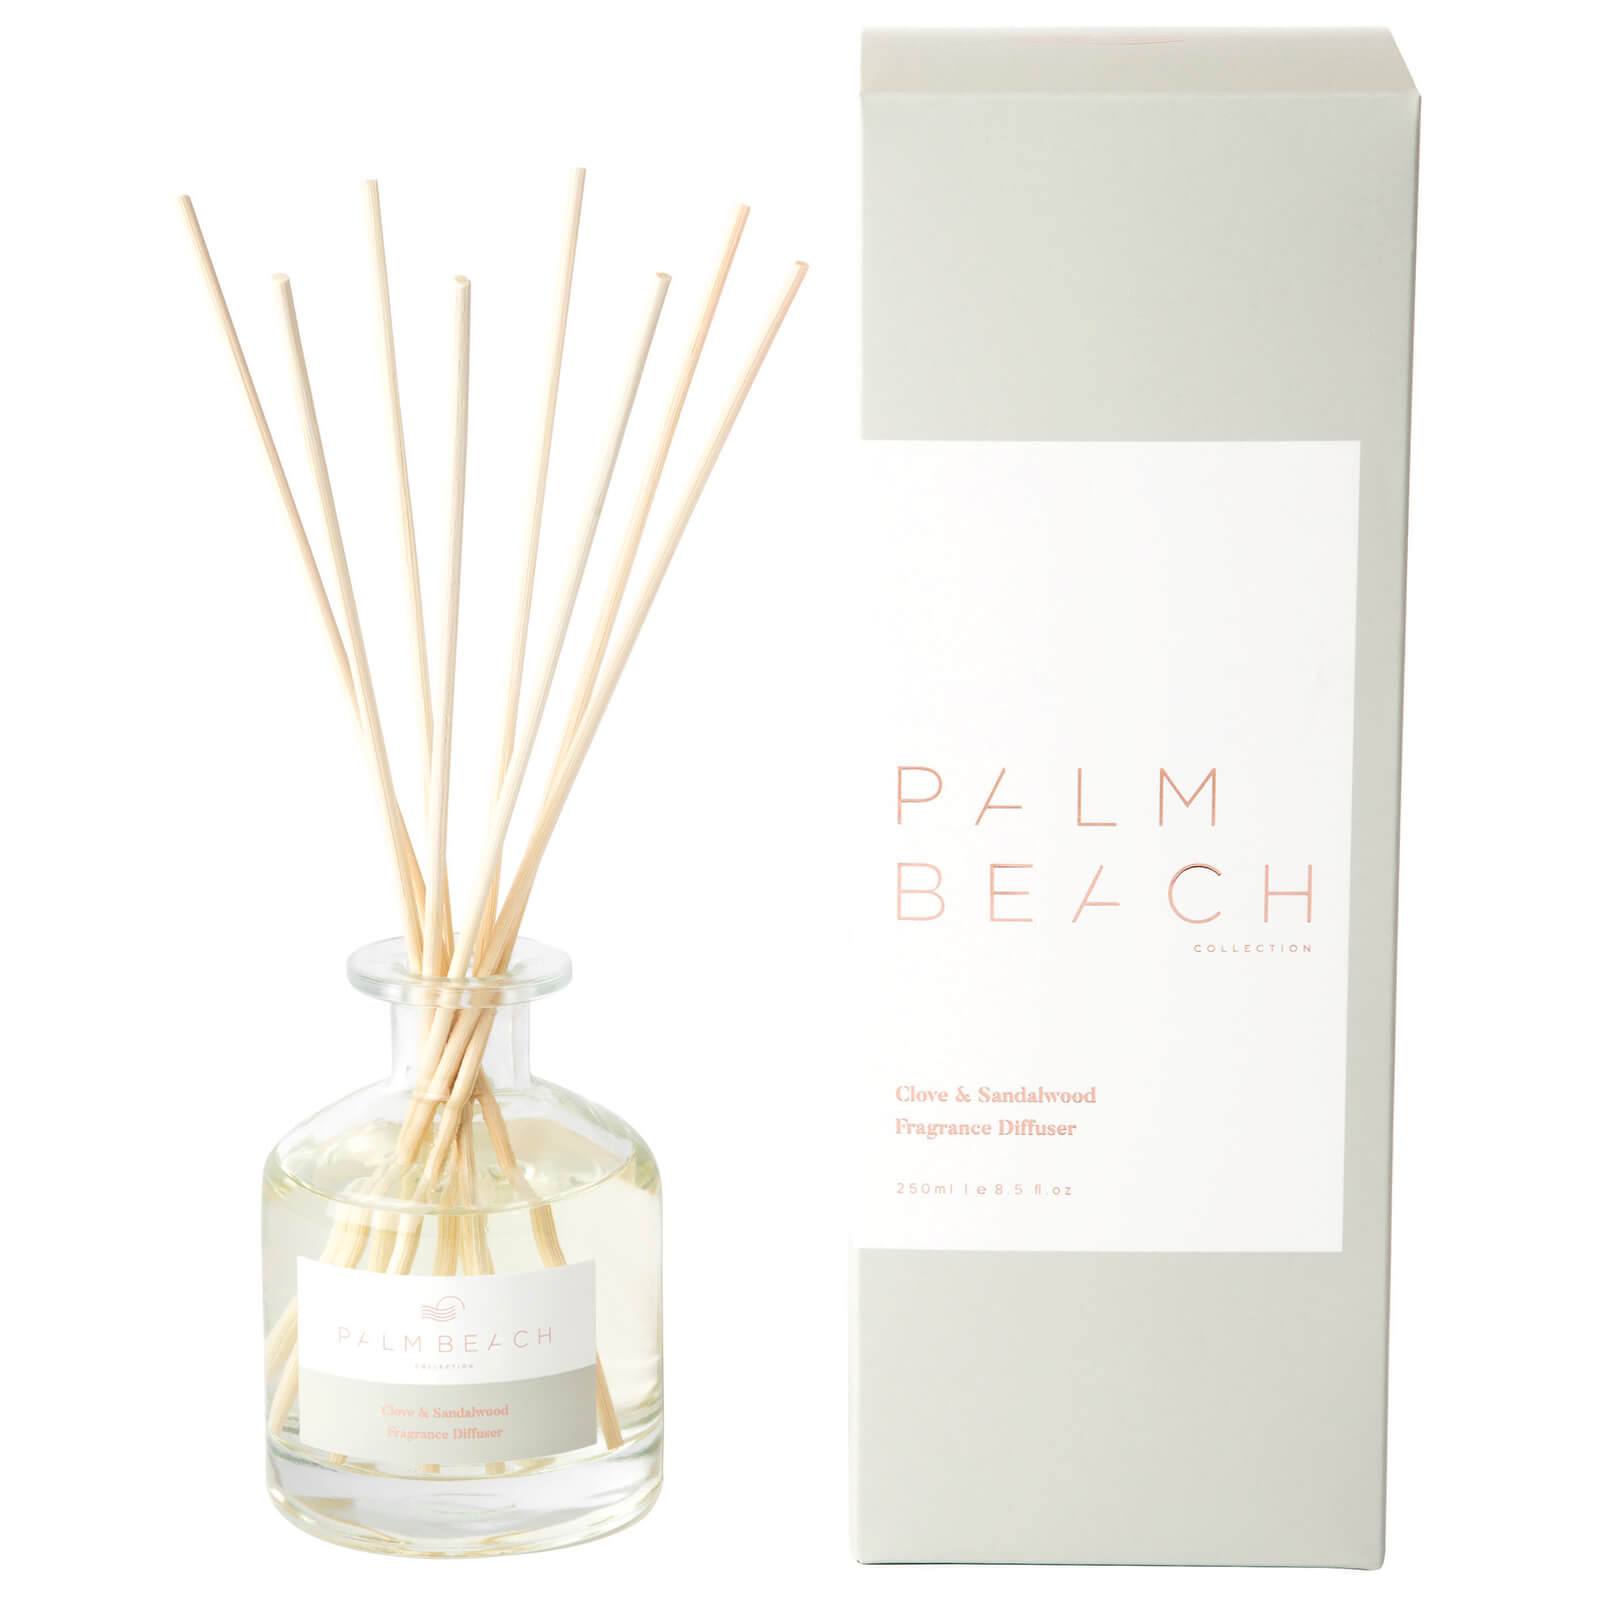 Palm Beach Collection Clove and Sandalwood Fragrance Diffuser 250ml